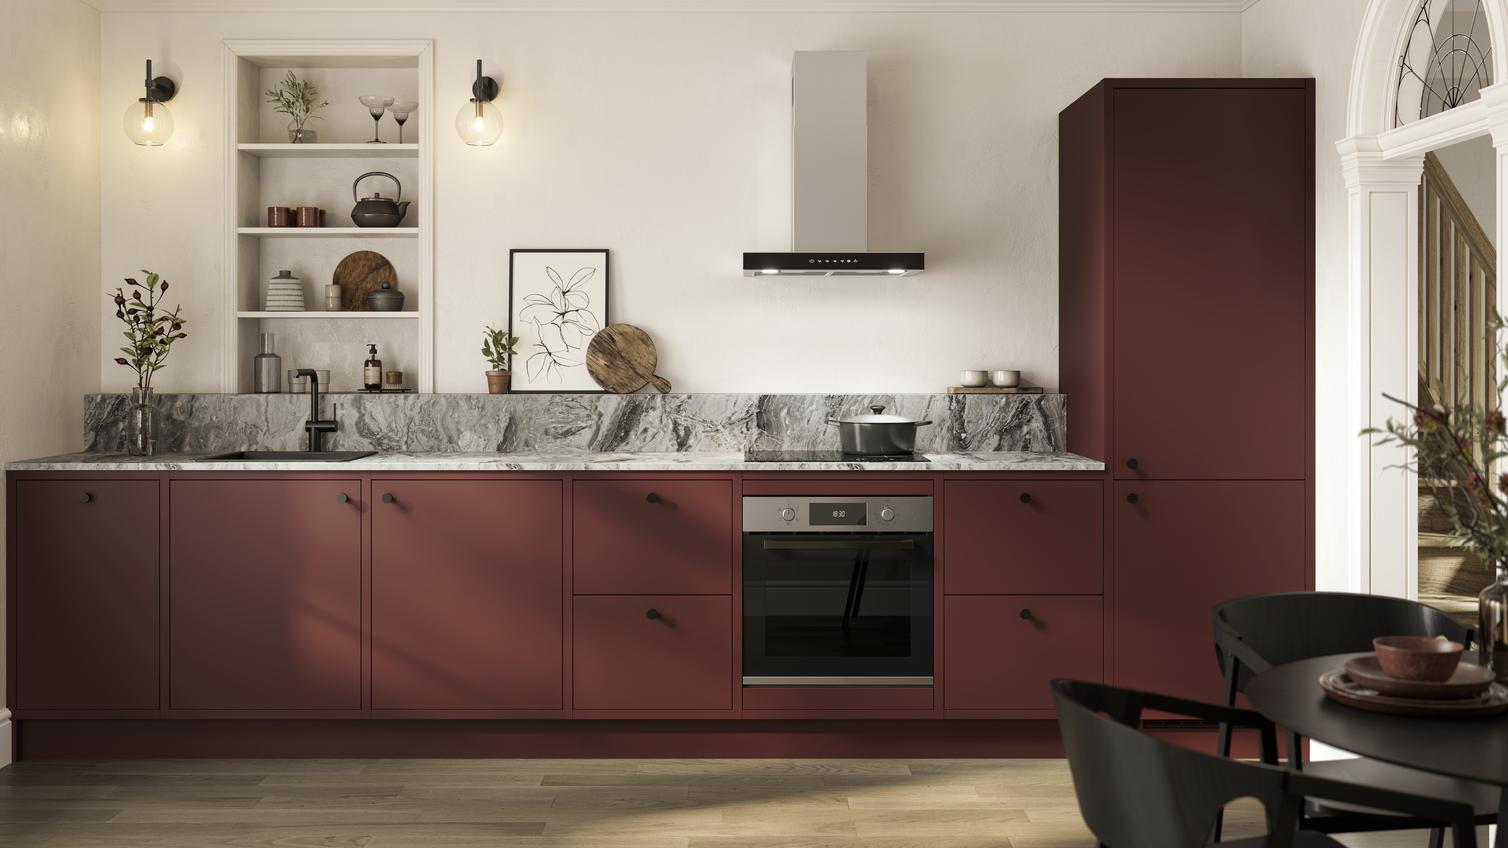 Garnet red kitchen in a single-wall layout with in-frame detailed cabinetry. Includes grey marble-effect counter and upstand.